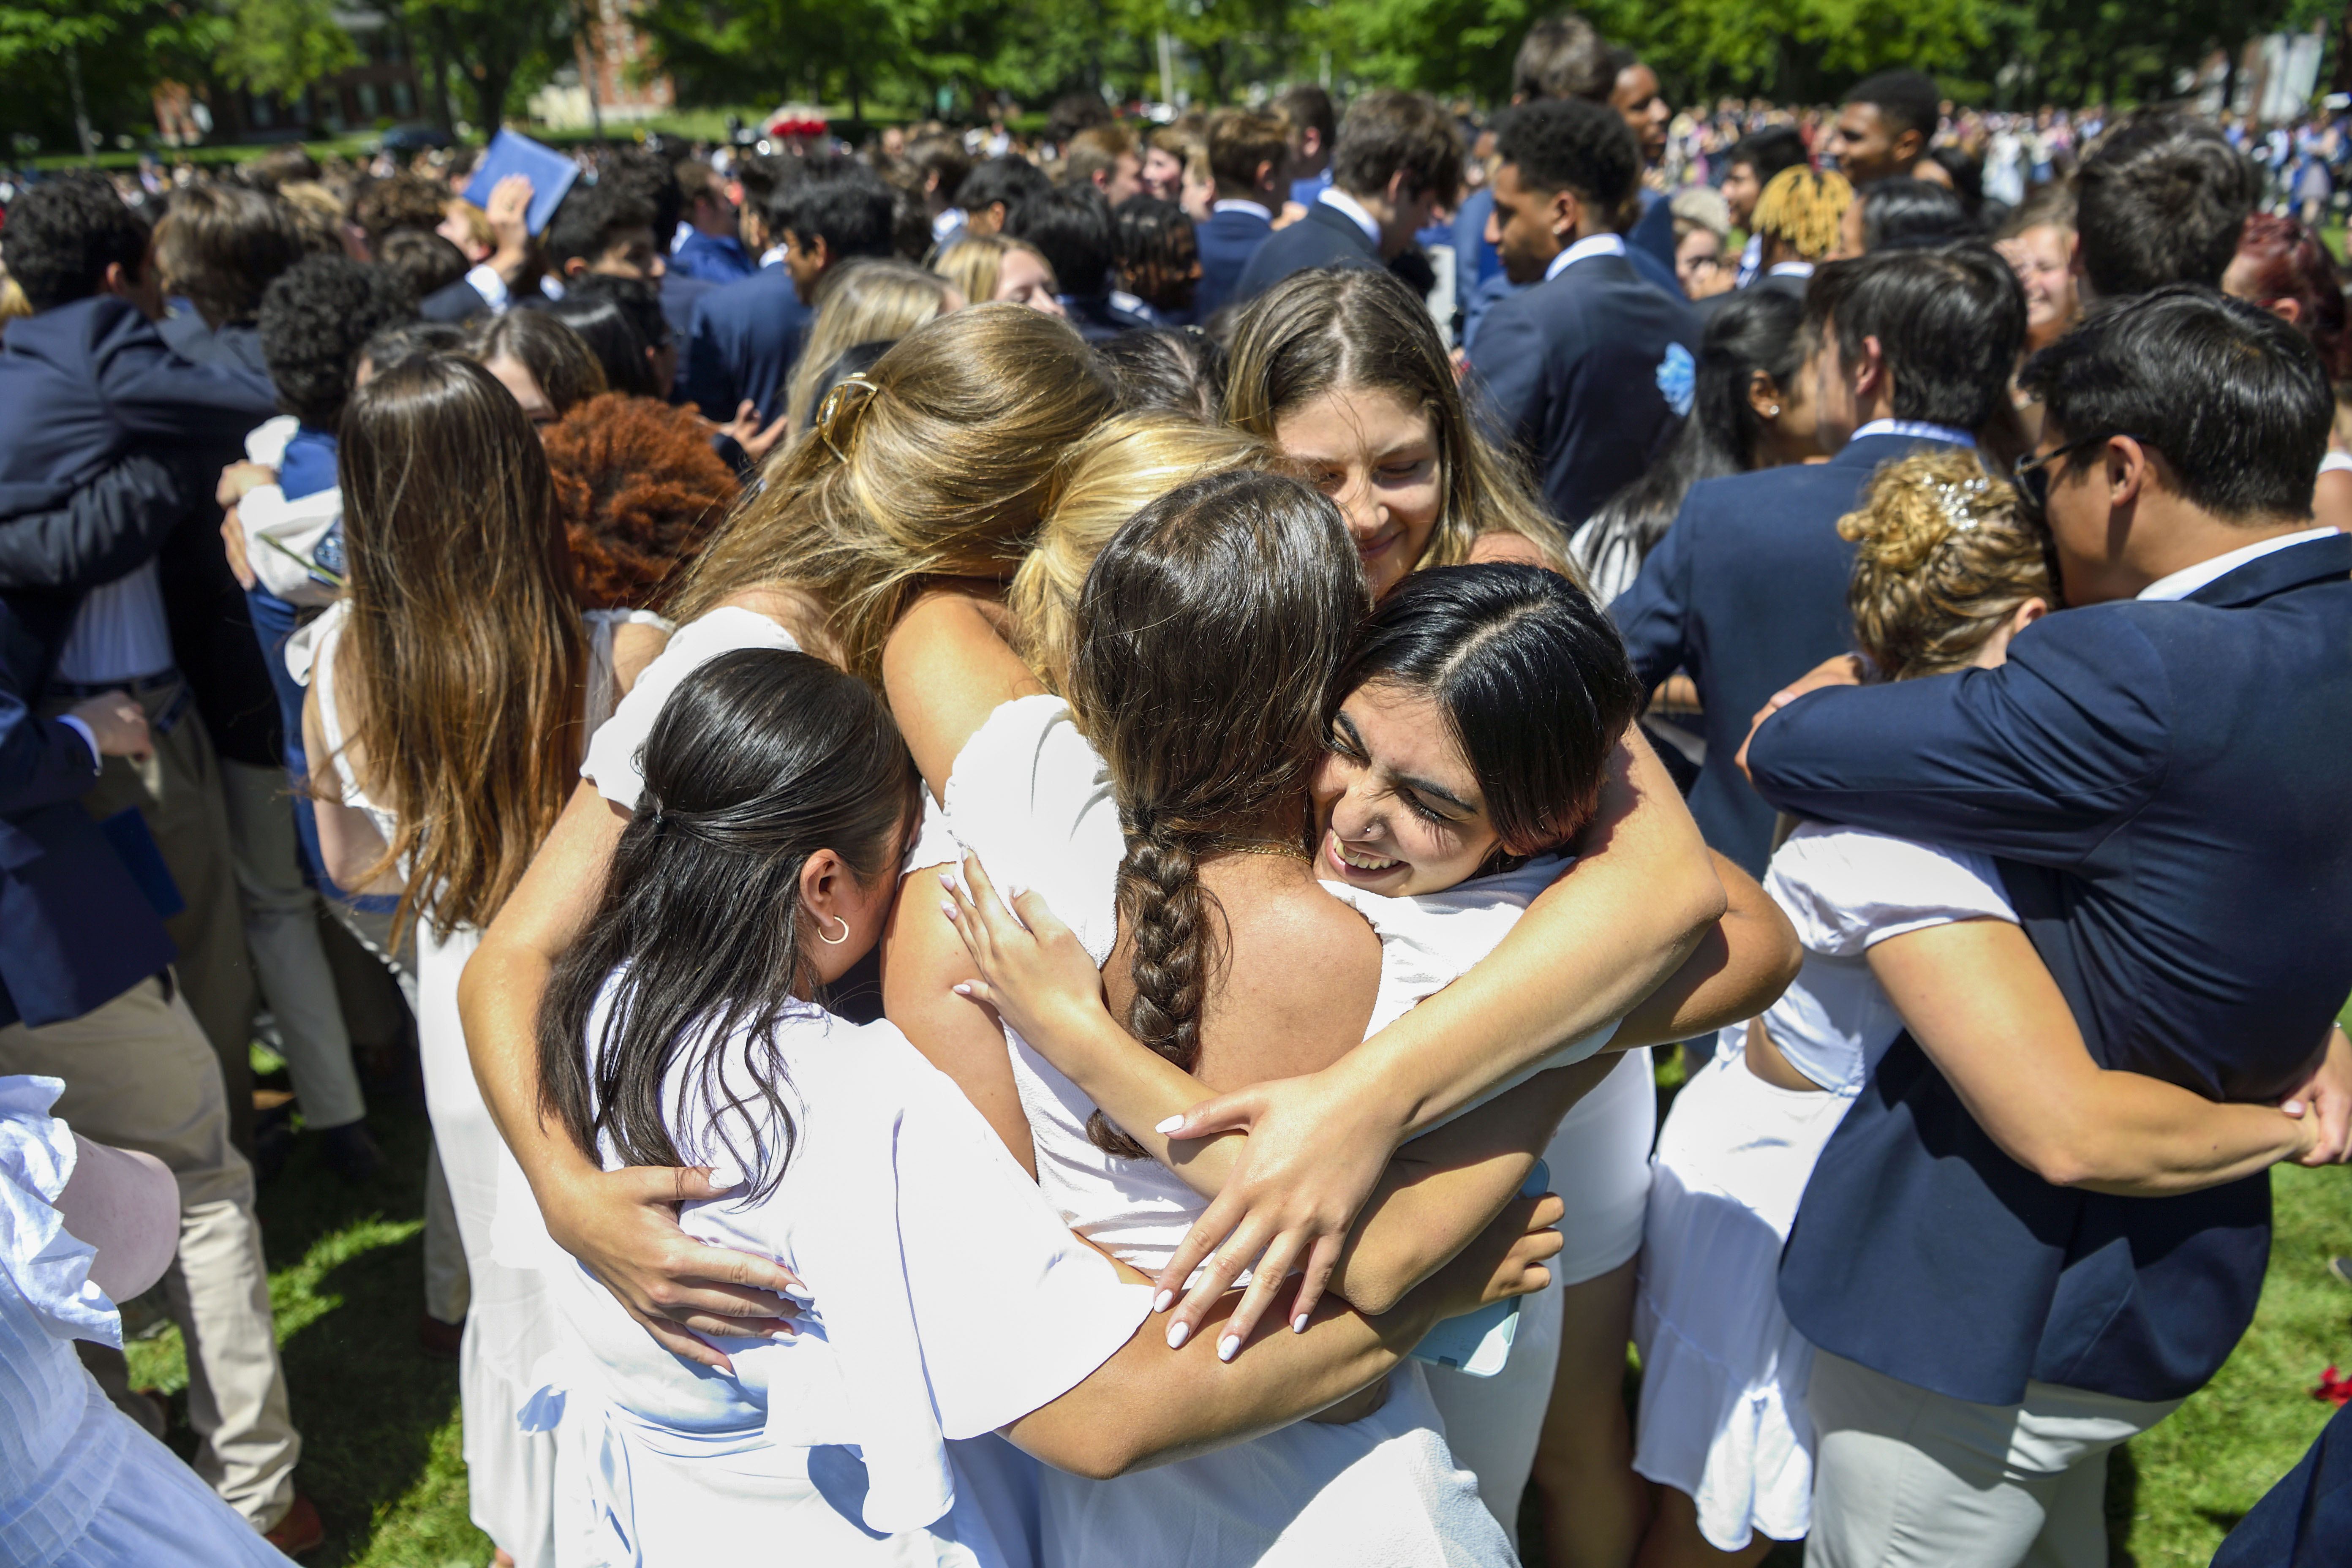 Andover students embracing at Commencement